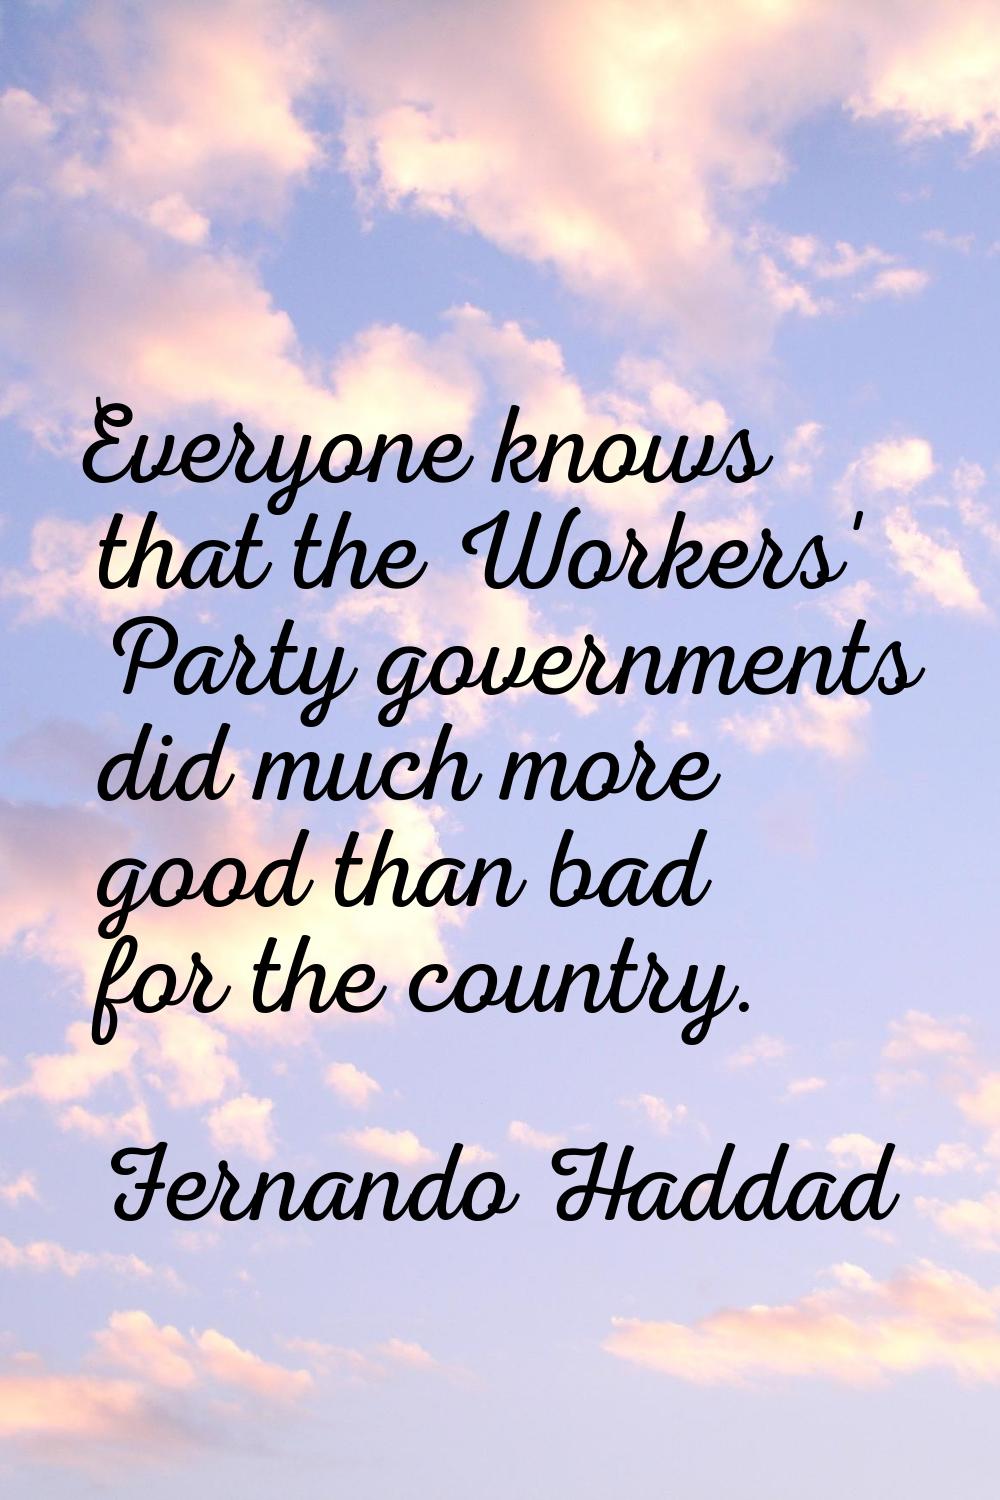 Everyone knows that the Workers' Party governments did much more good than bad for the country.